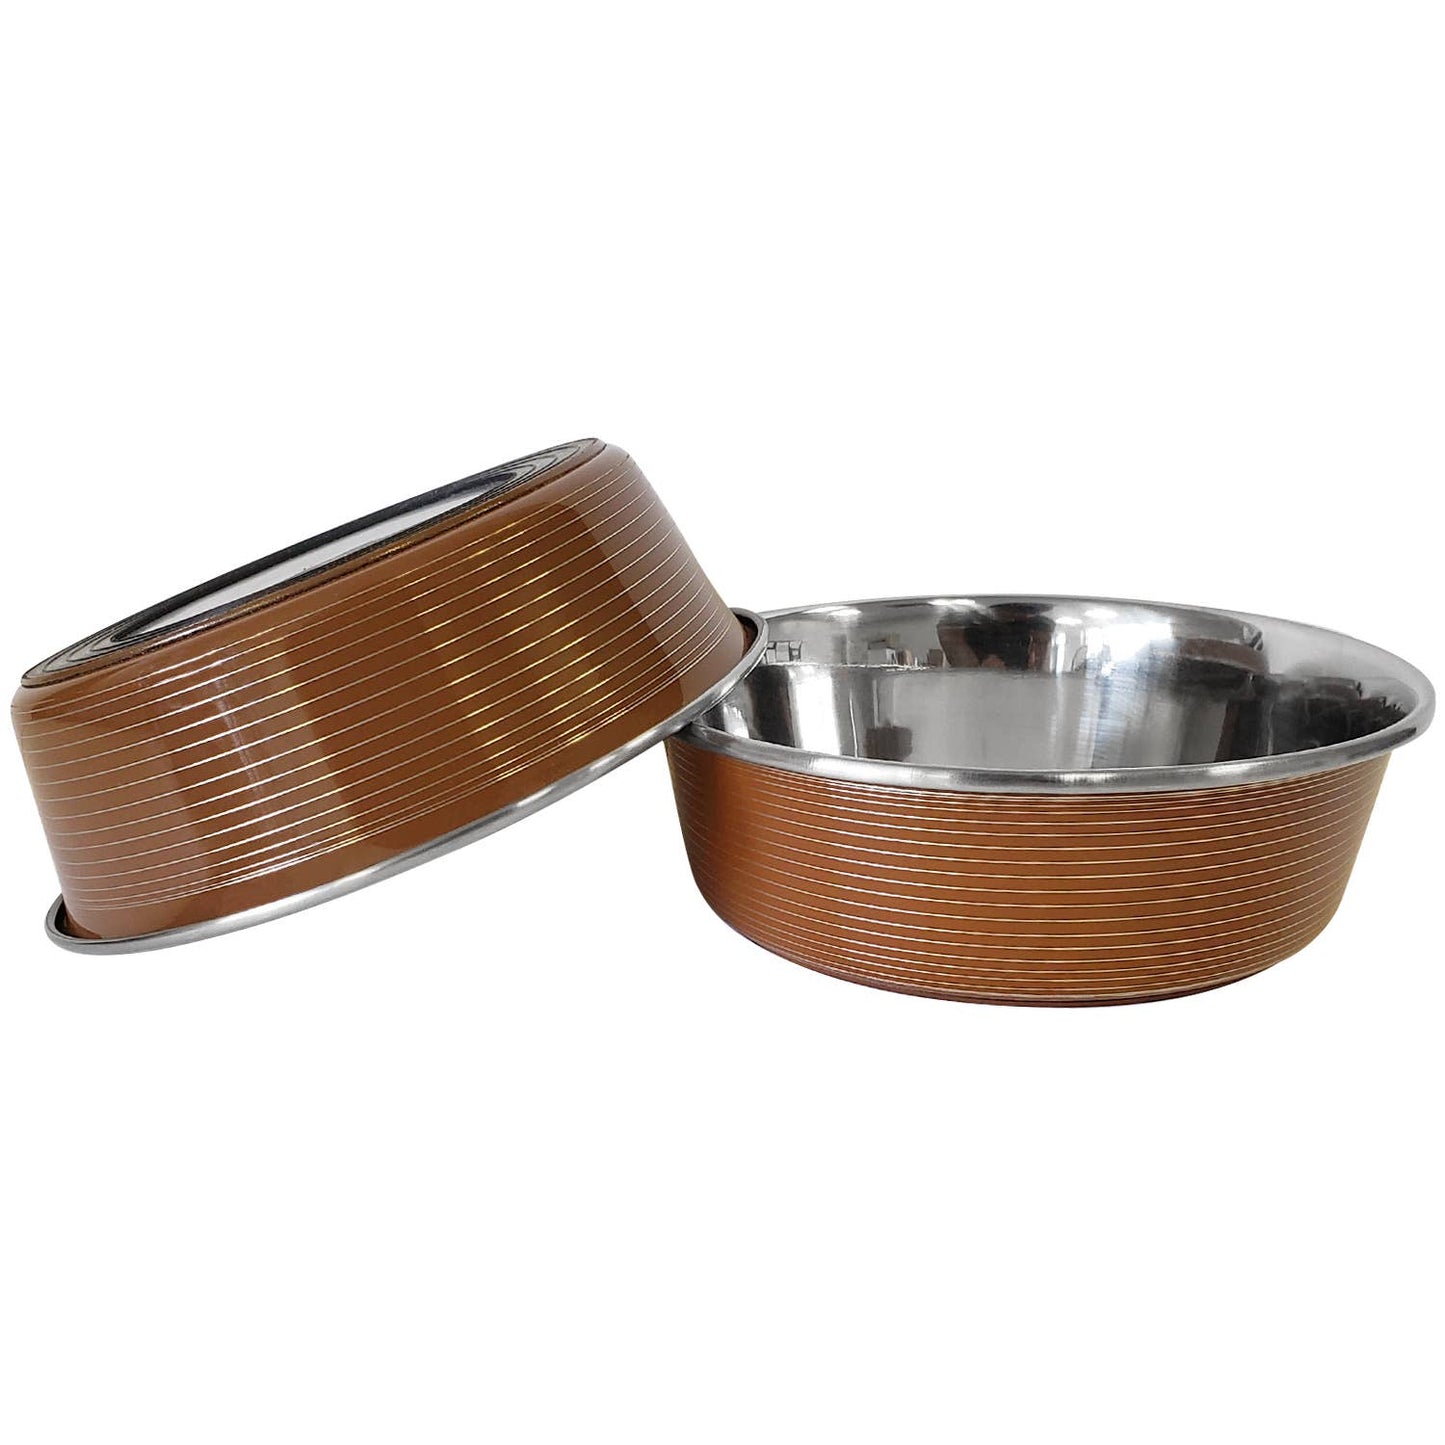 Eco-friendly Striped Deluxe Stainless Steel Bowl: Black